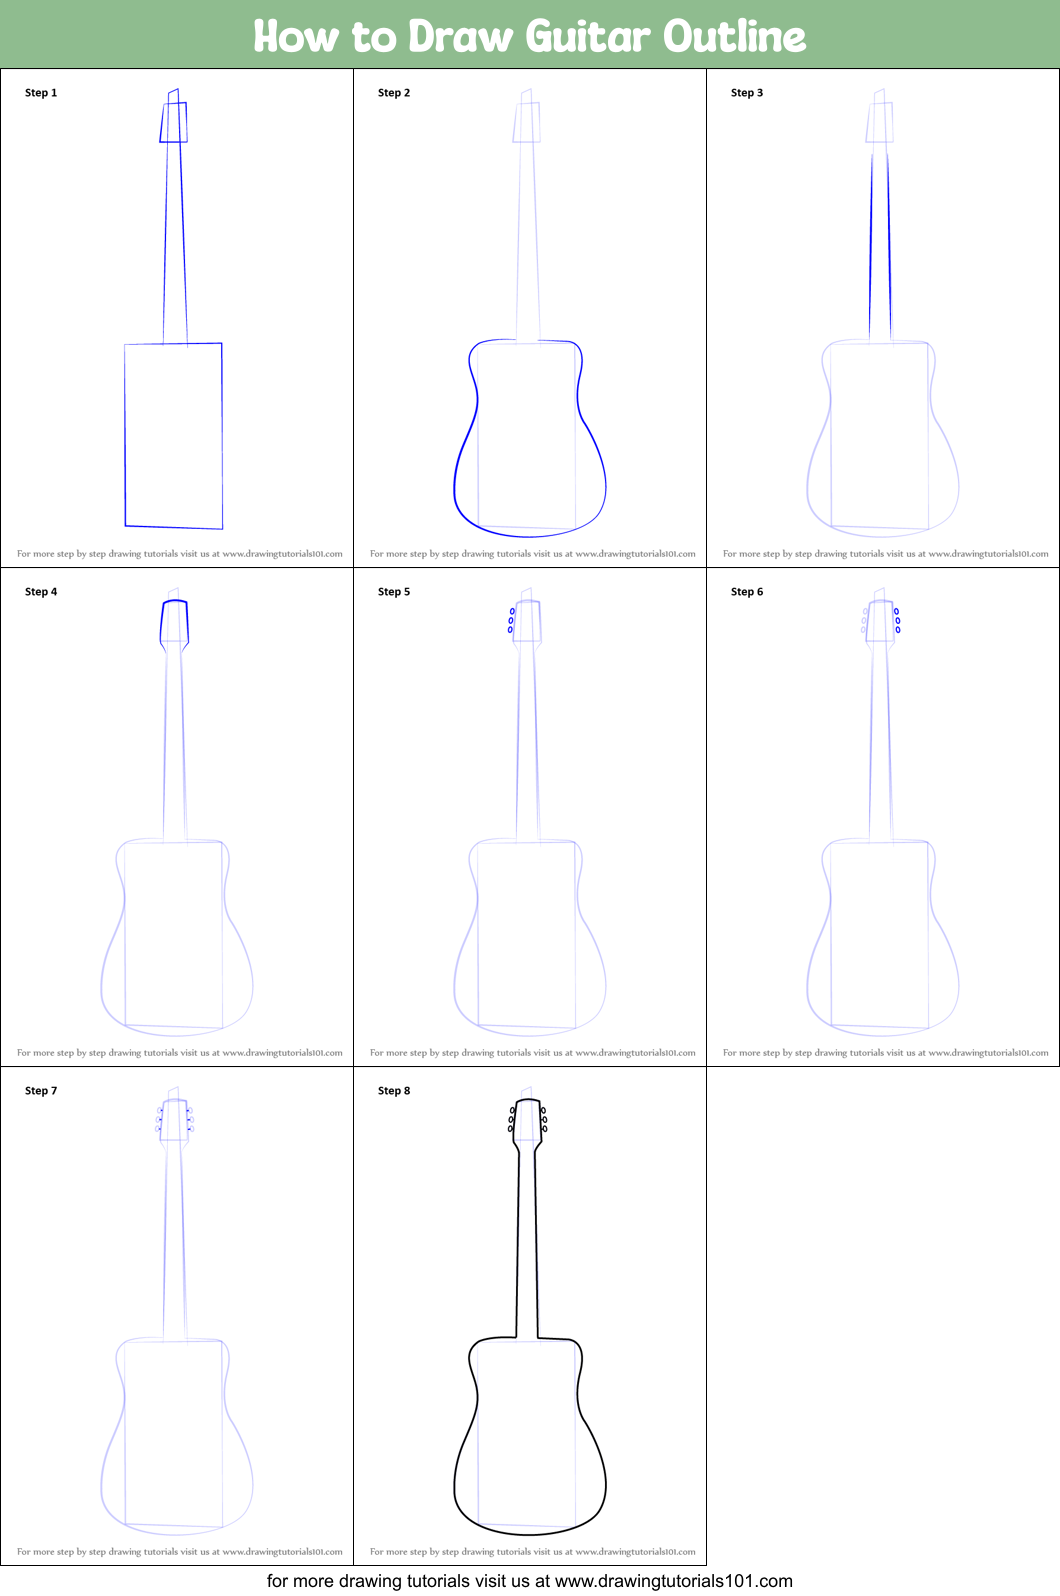 How to Draw Guitar Outline printable step by step drawing